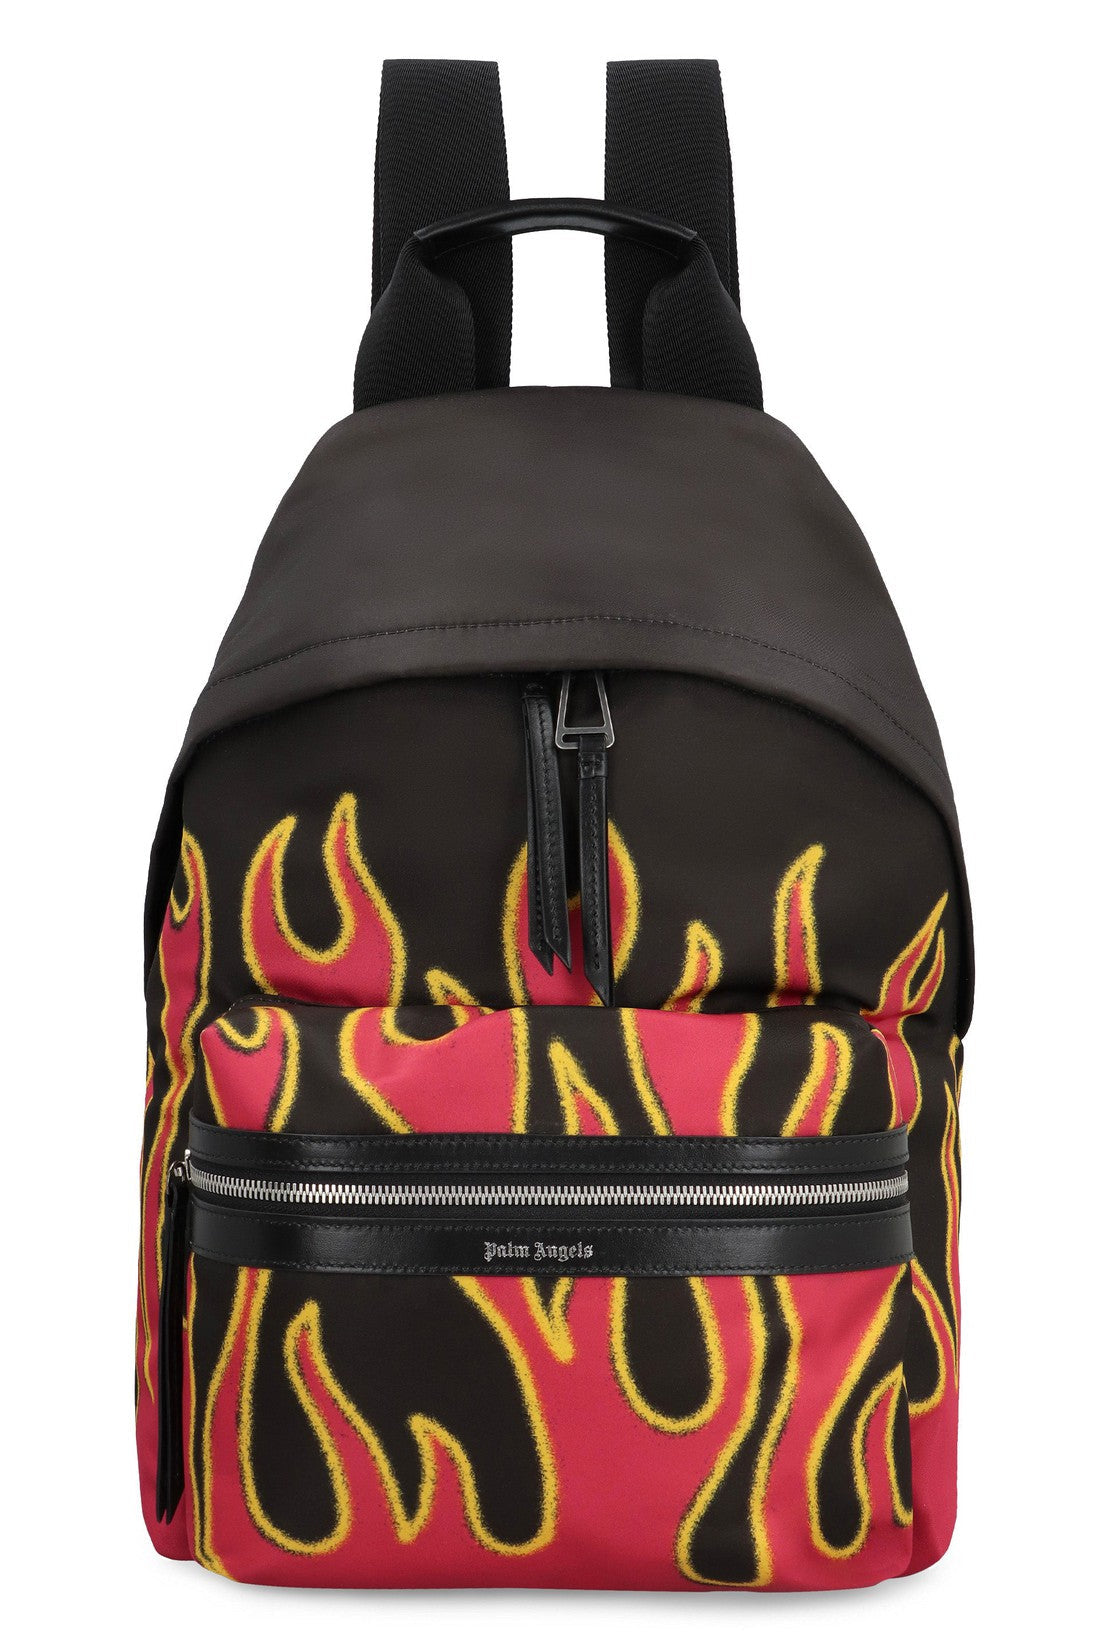 Palm Angels-OUTLET-SALE-Printed nylon backpack-ARCHIVIST